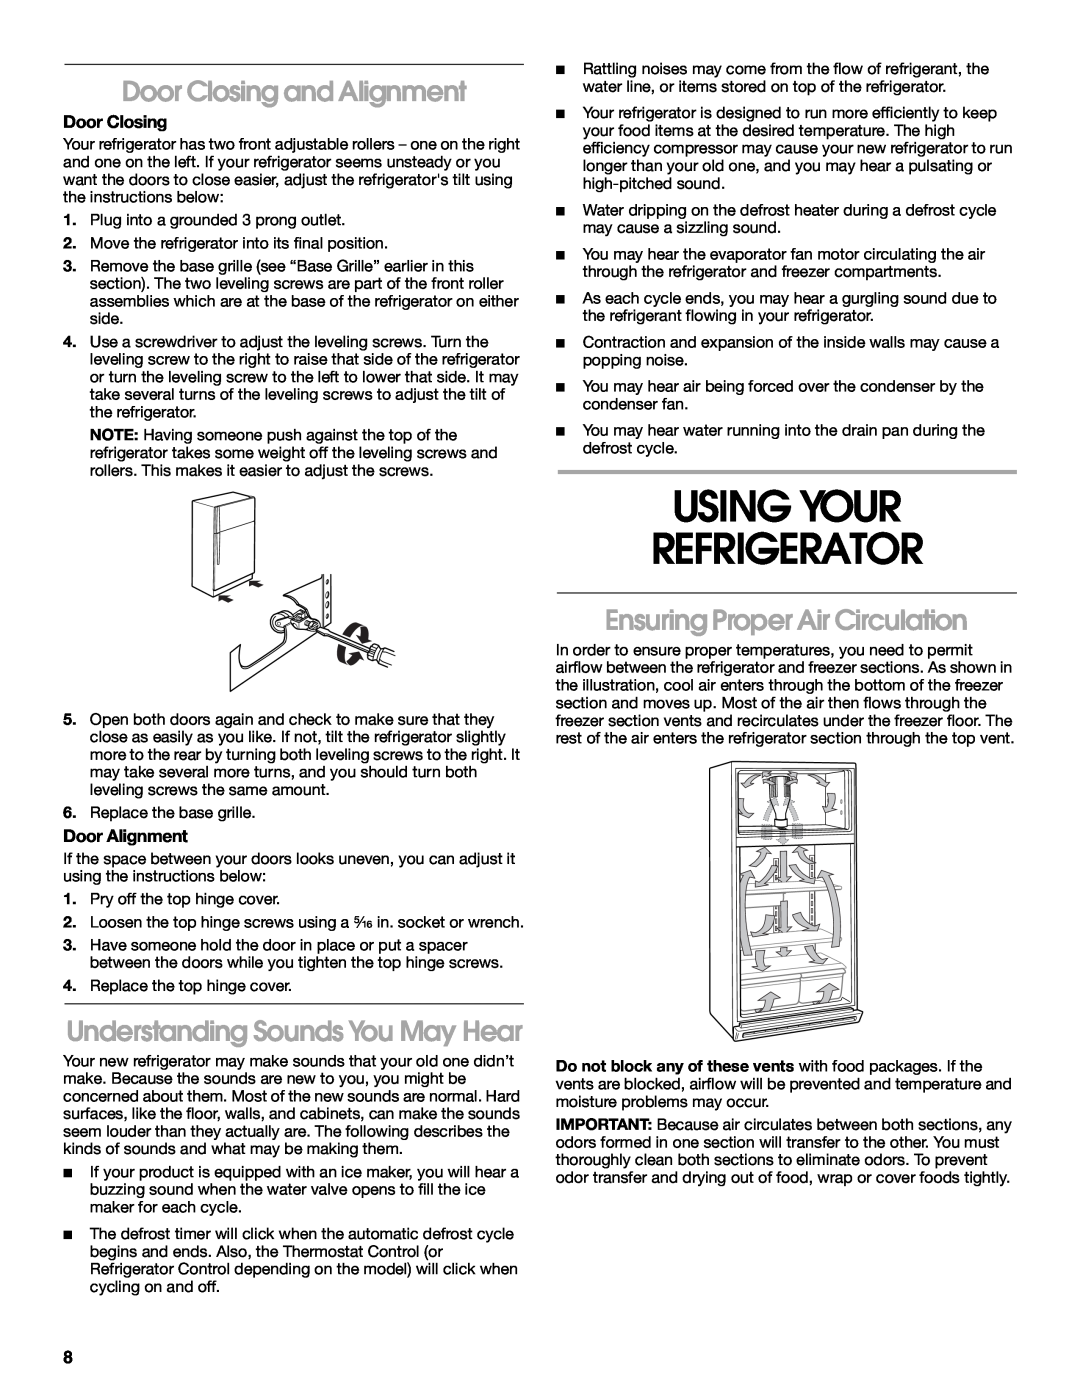 Whirlpool ST18PKXJW00 manual Using Your Refrigerator, Door Closing and Alignment, Understanding Sounds You May Hear 